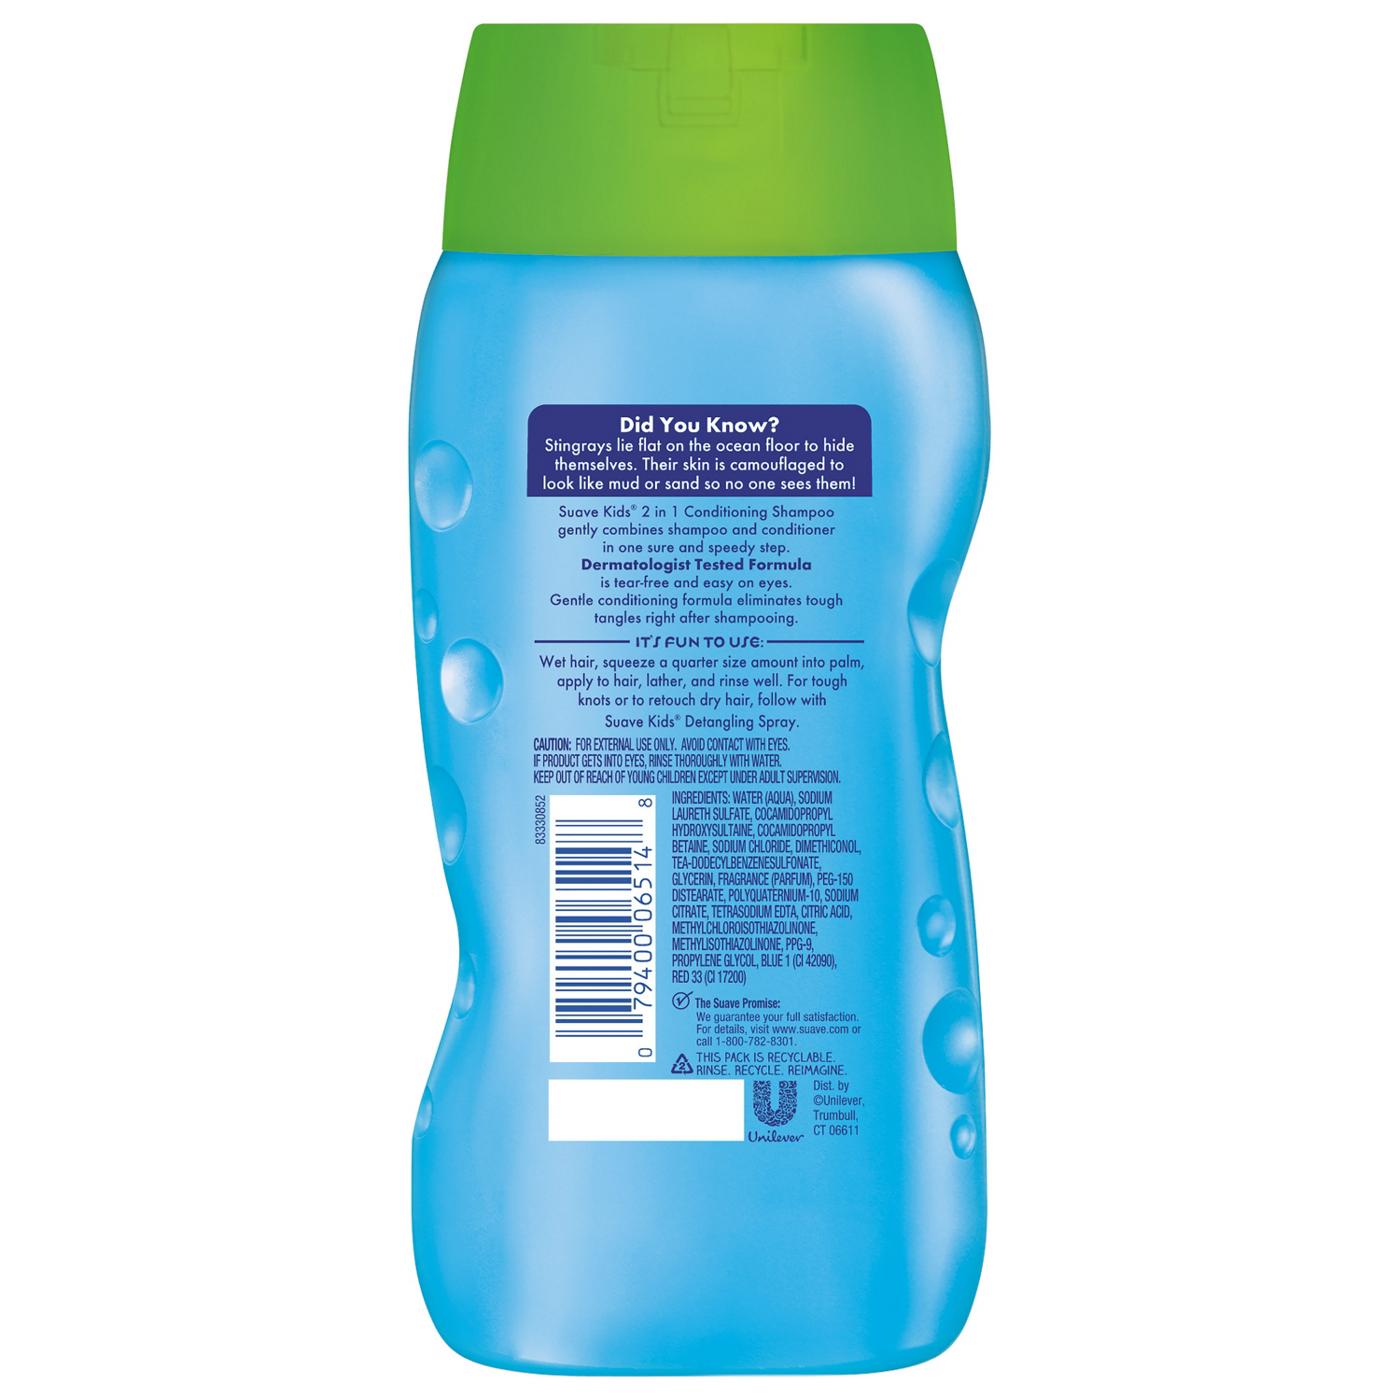 Suave Kids Surf's Up 2 in 1 Shampoo and Conditioner; image 2 of 3